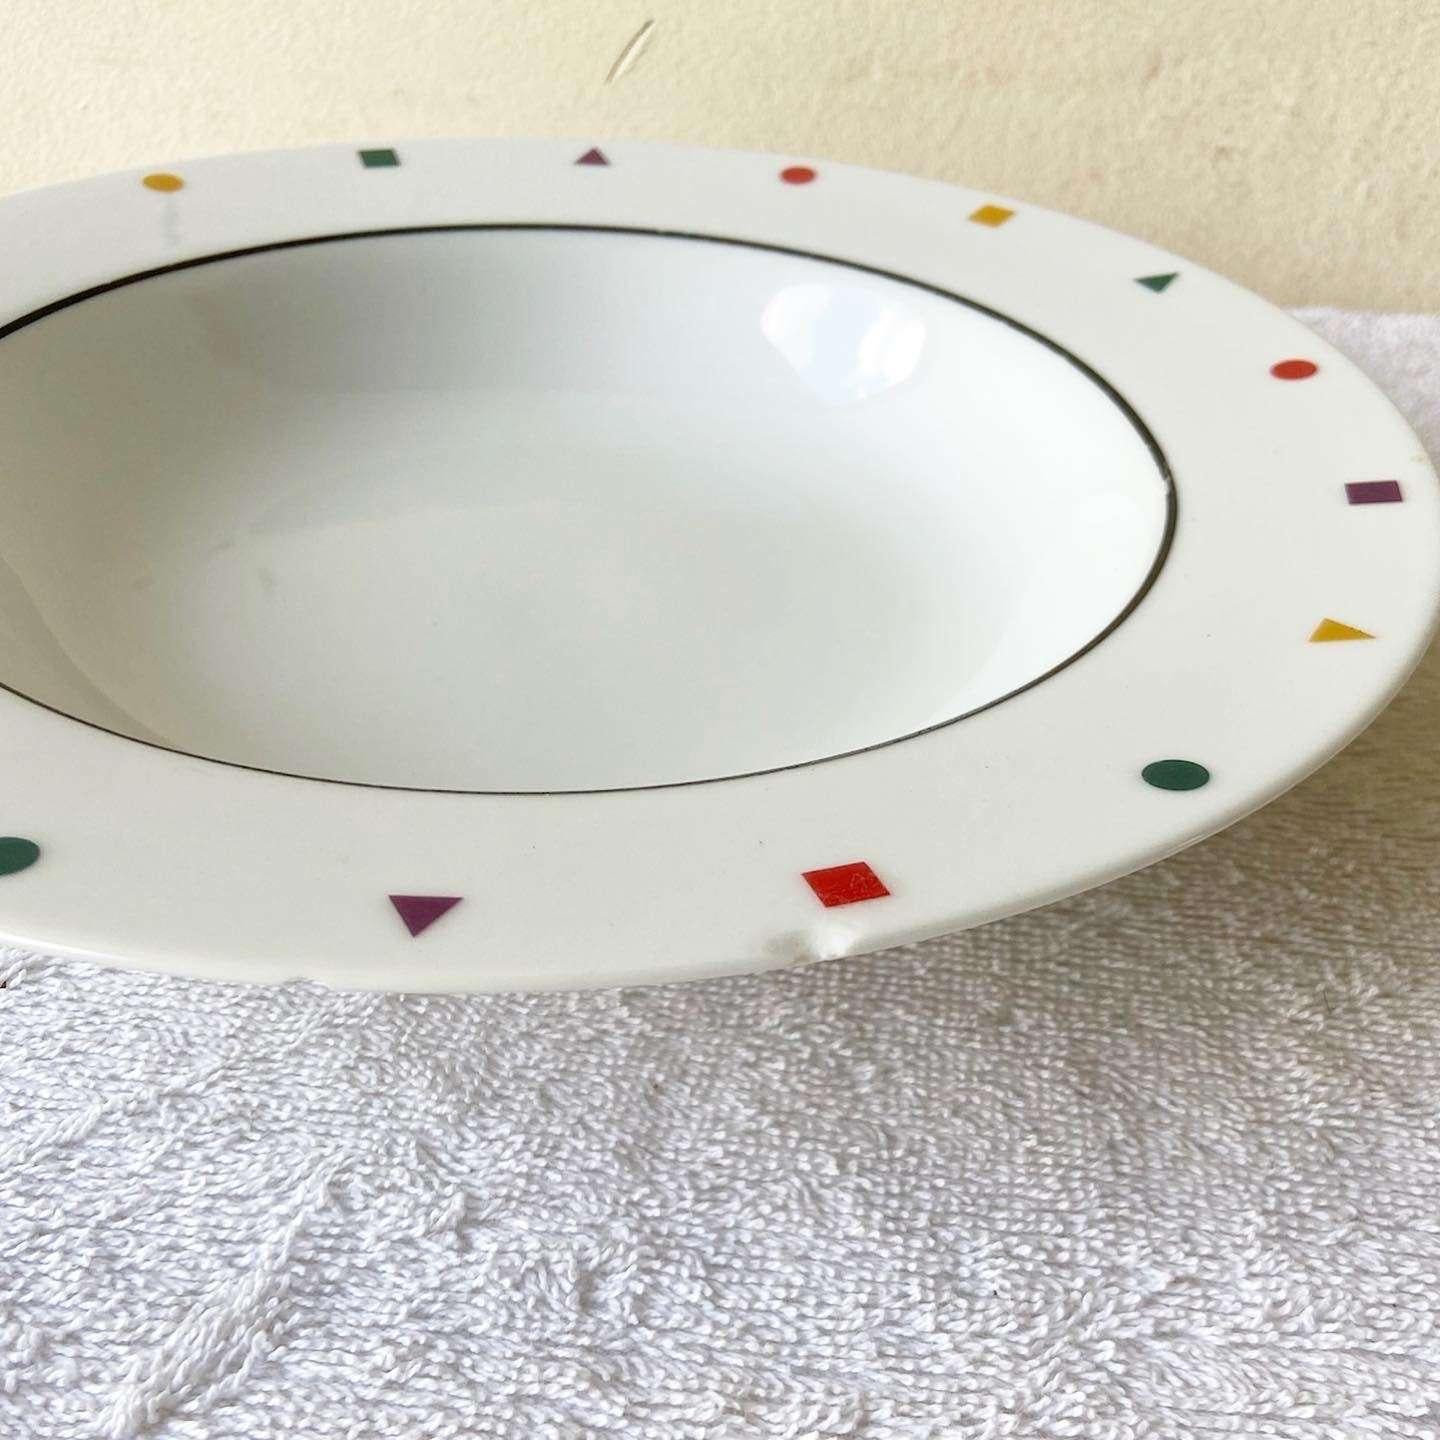 Amazing vintage postmodern set of 7 dinner bowls by Sakasi. Each feature red, yellow, green and purple triangles, squares and circles bordering the edges.
